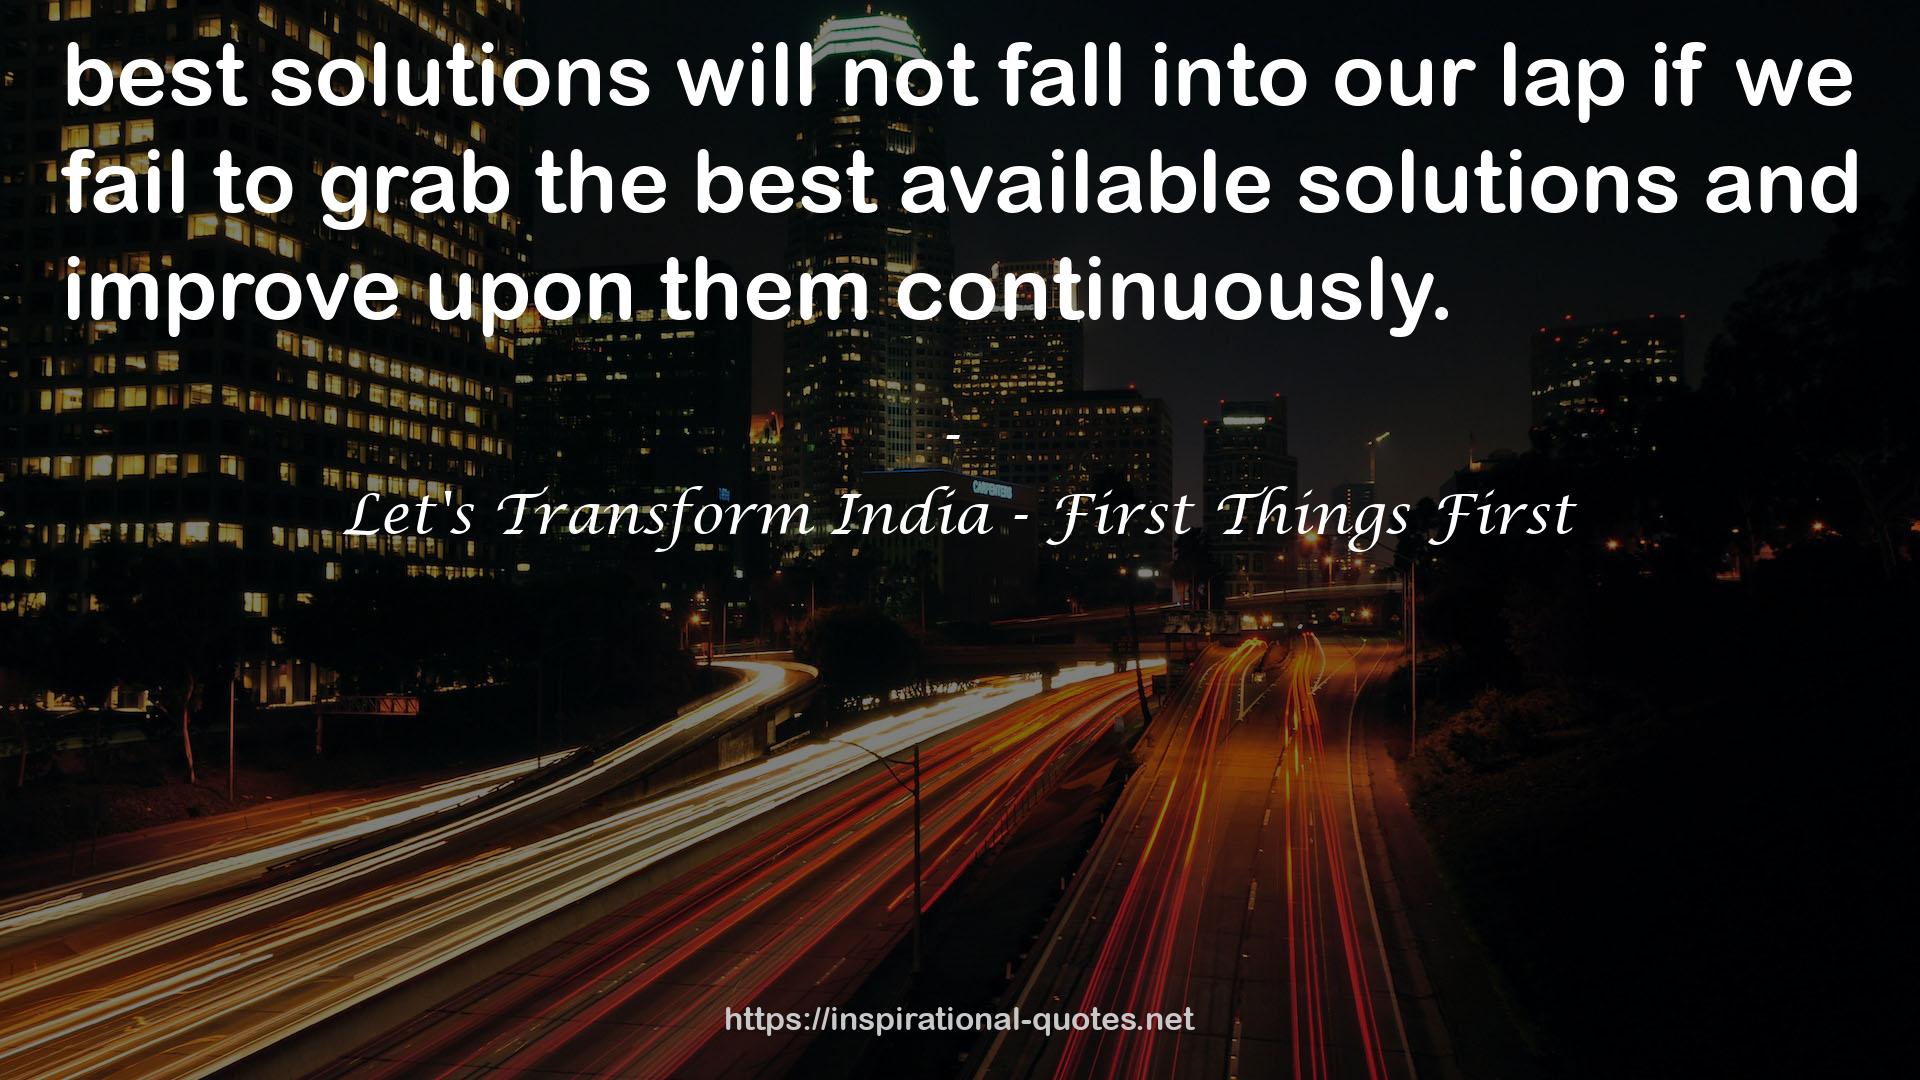 Let's Transform India - First Things First QUOTES